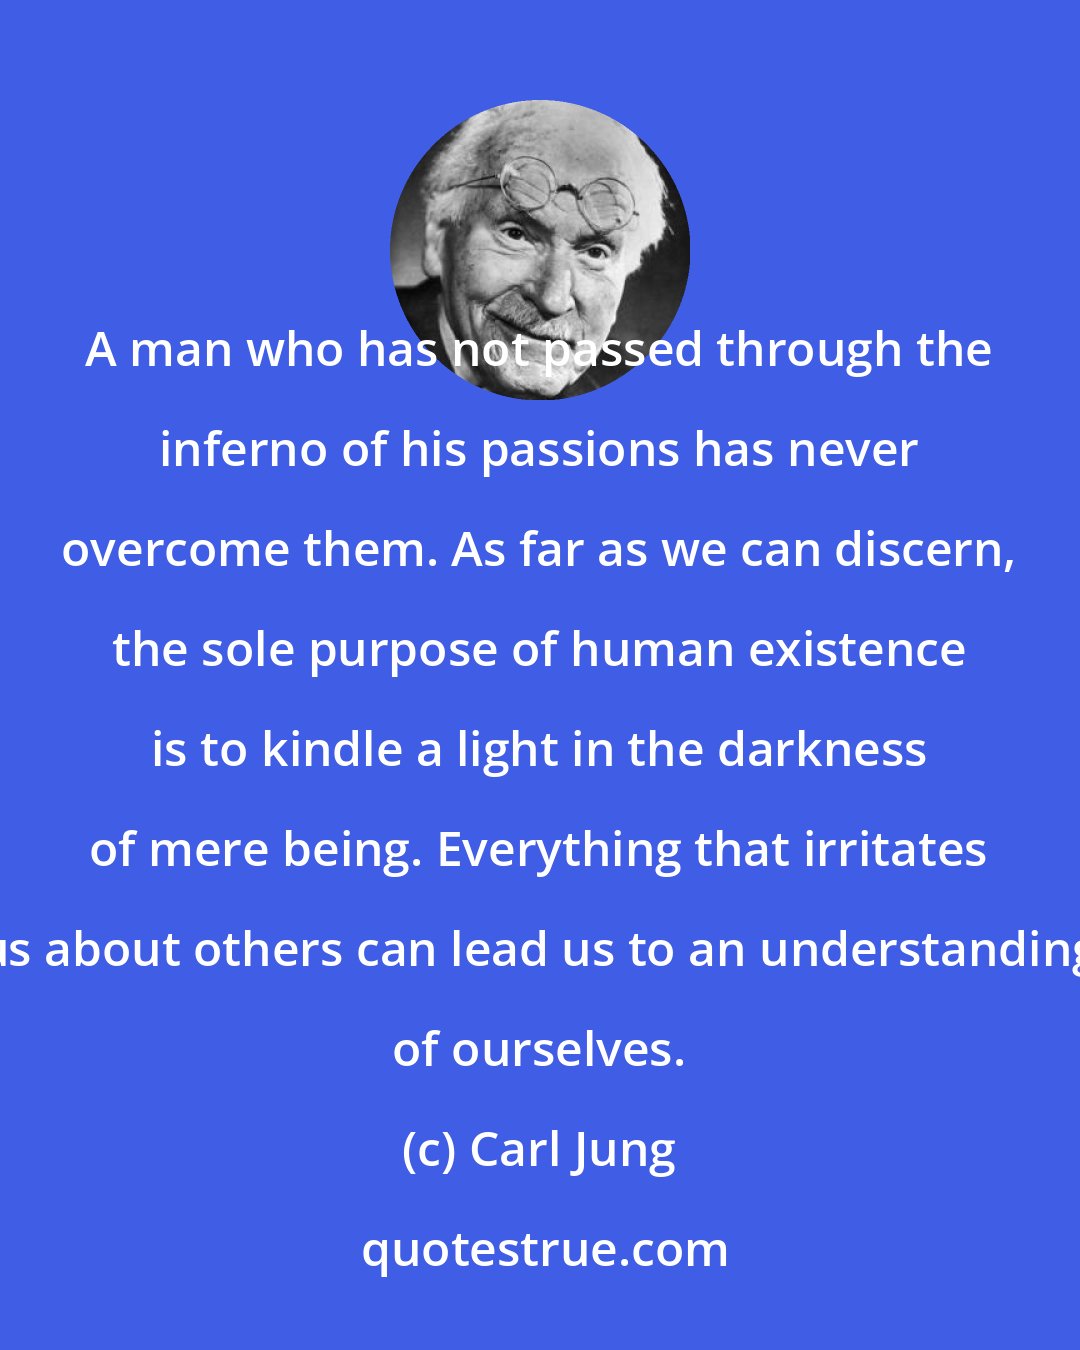 Carl Jung: A man who has not passed through the inferno of his passions has never overcome them. As far as we can discern, the sole purpose of human existence is to kindle a light in the darkness of mere being. Everything that irritates us about others can lead us to an understanding of ourselves.